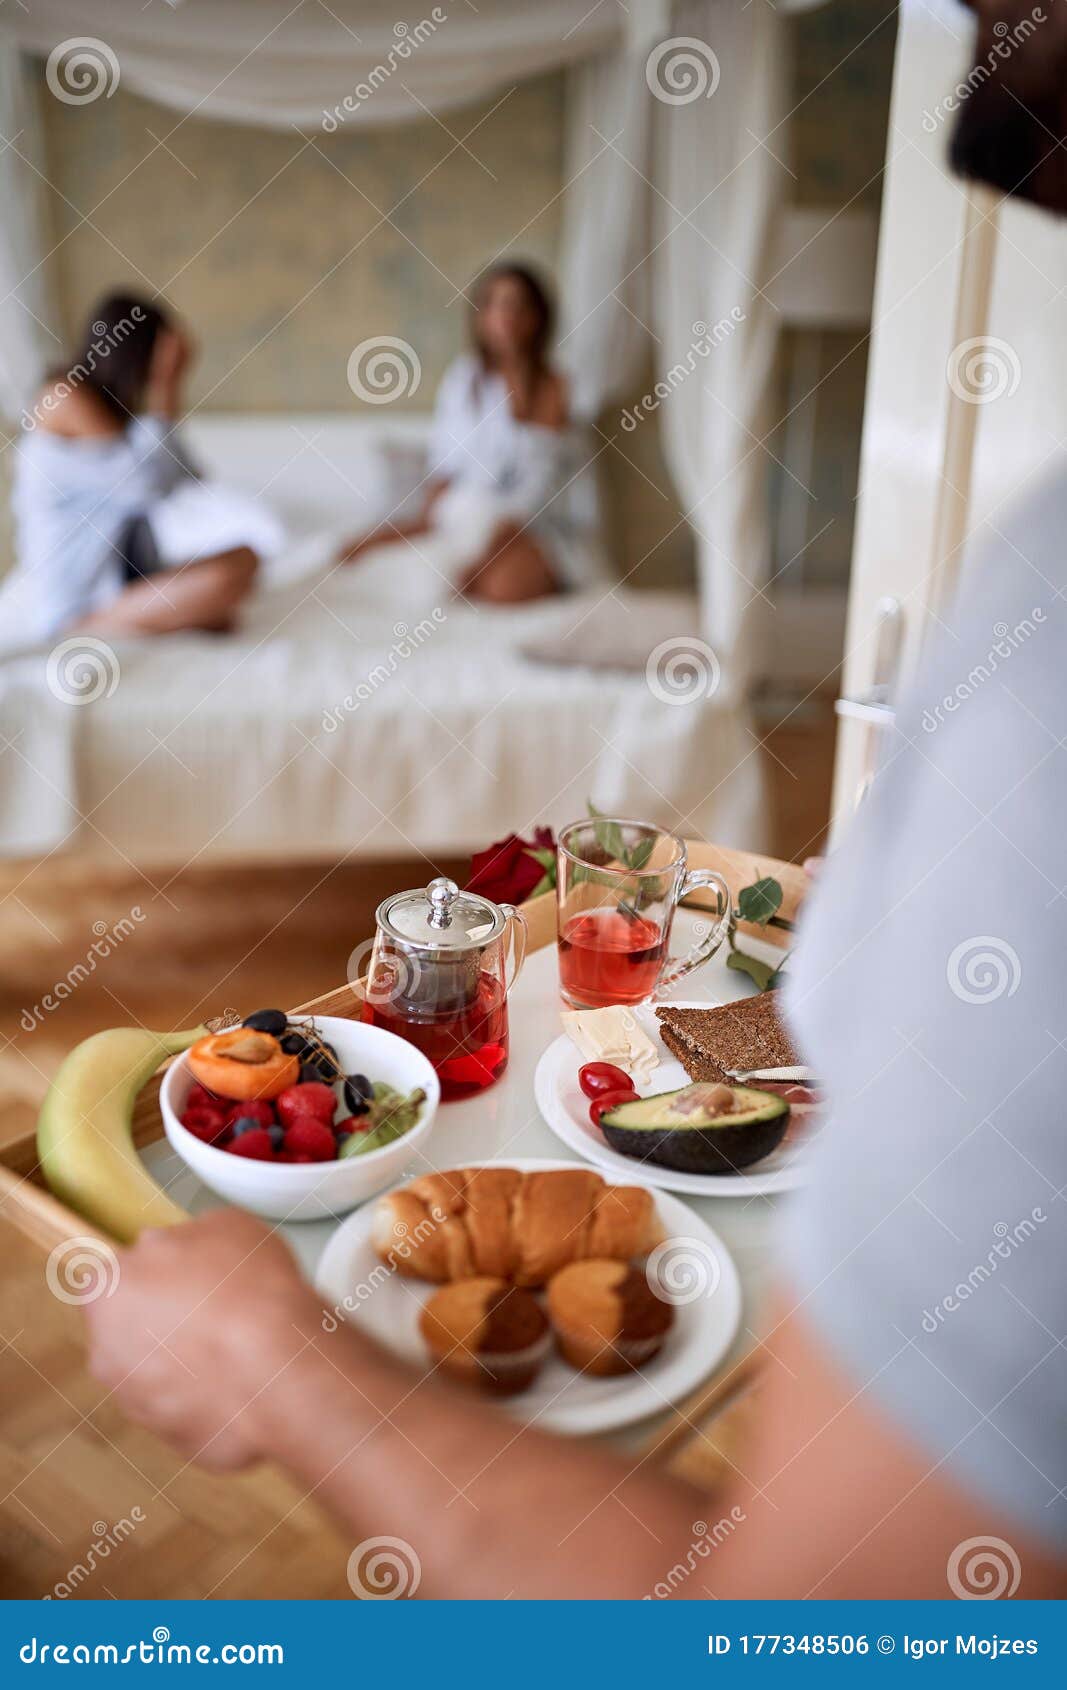 Serving breakfast in bed stock photo. Image of morning - 177348506